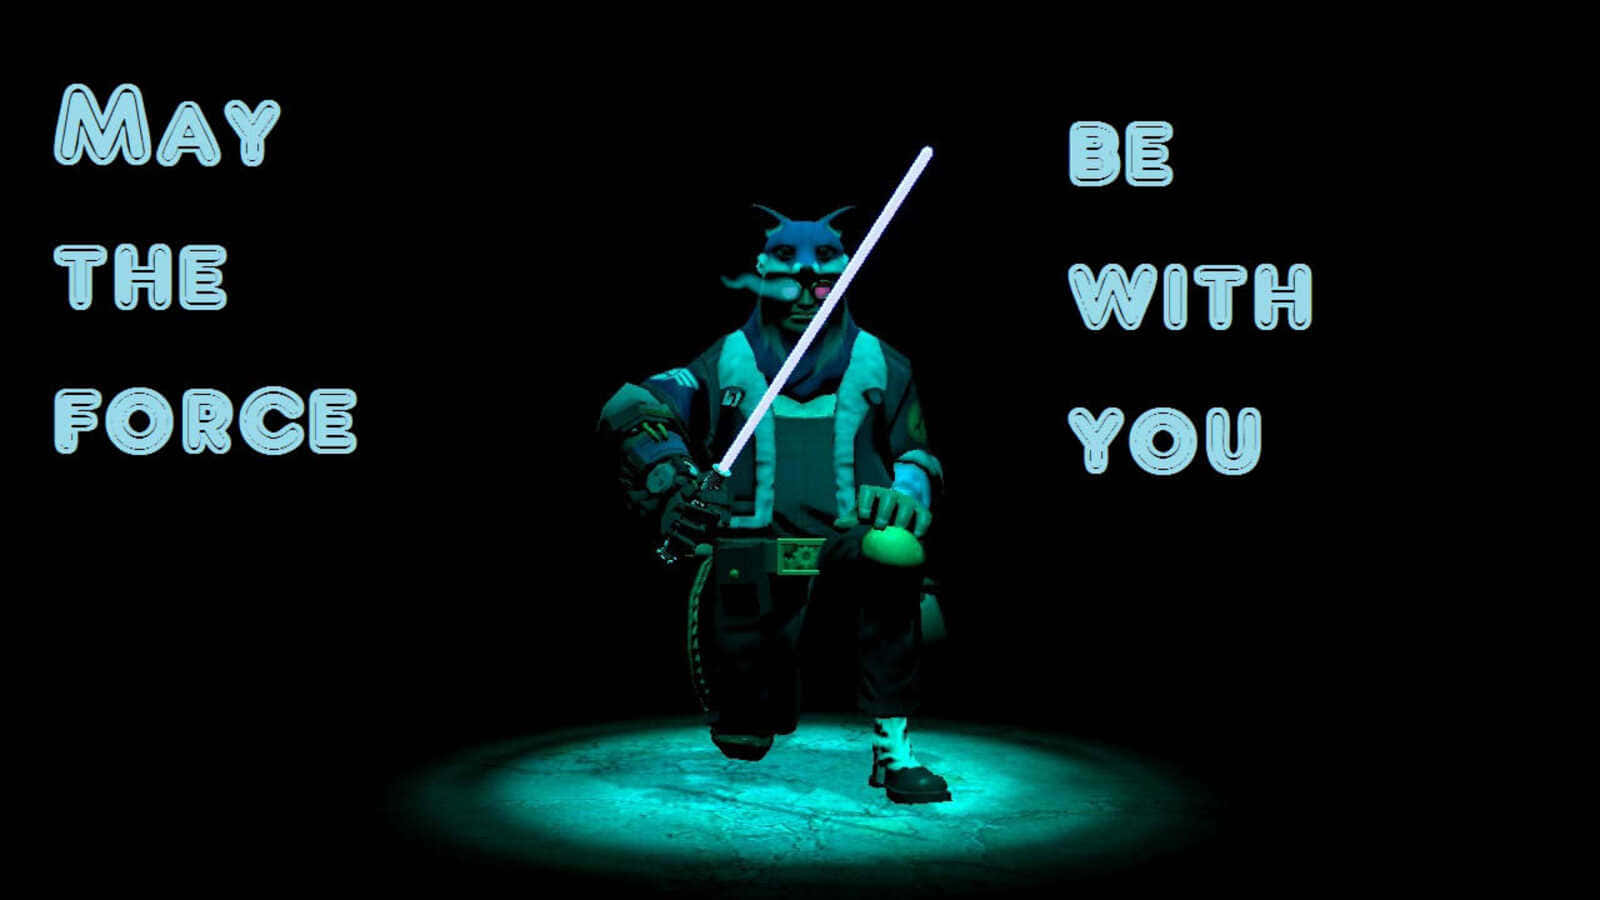 May the Force Be With You in Galactic Style Wallpaper